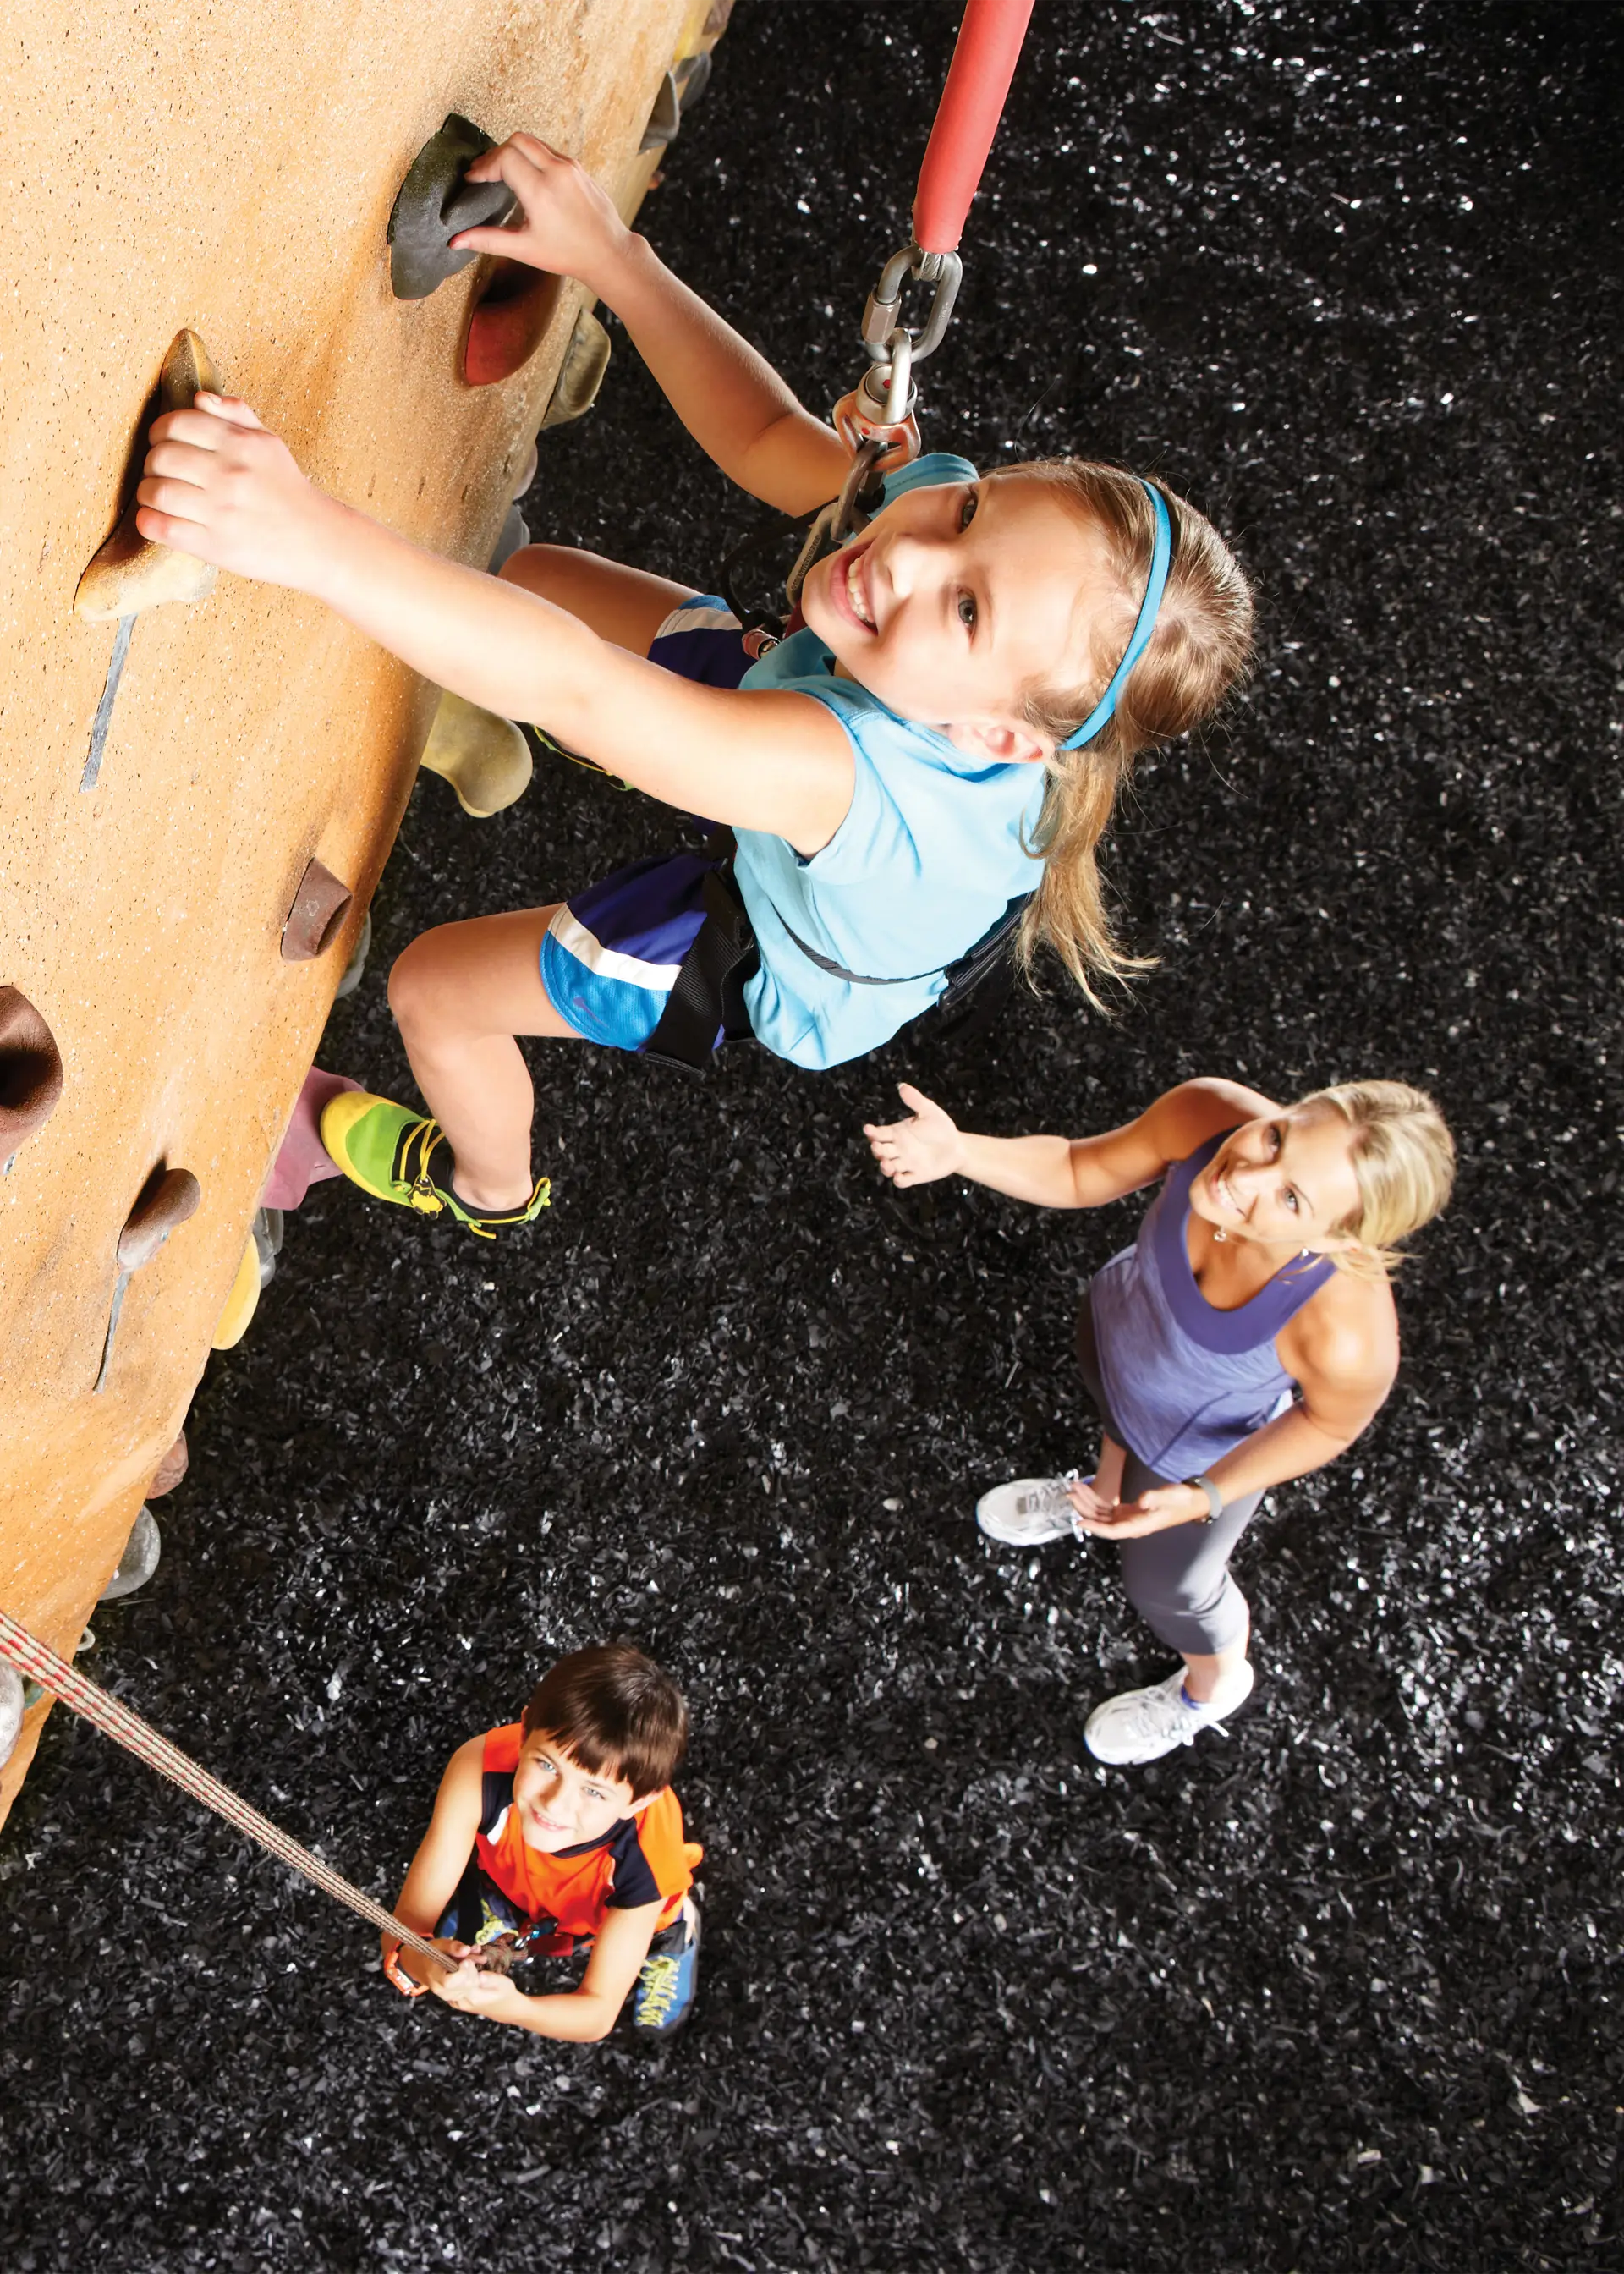 A smiling child in a harness climbing on a rock wall while two other smiling people watch.